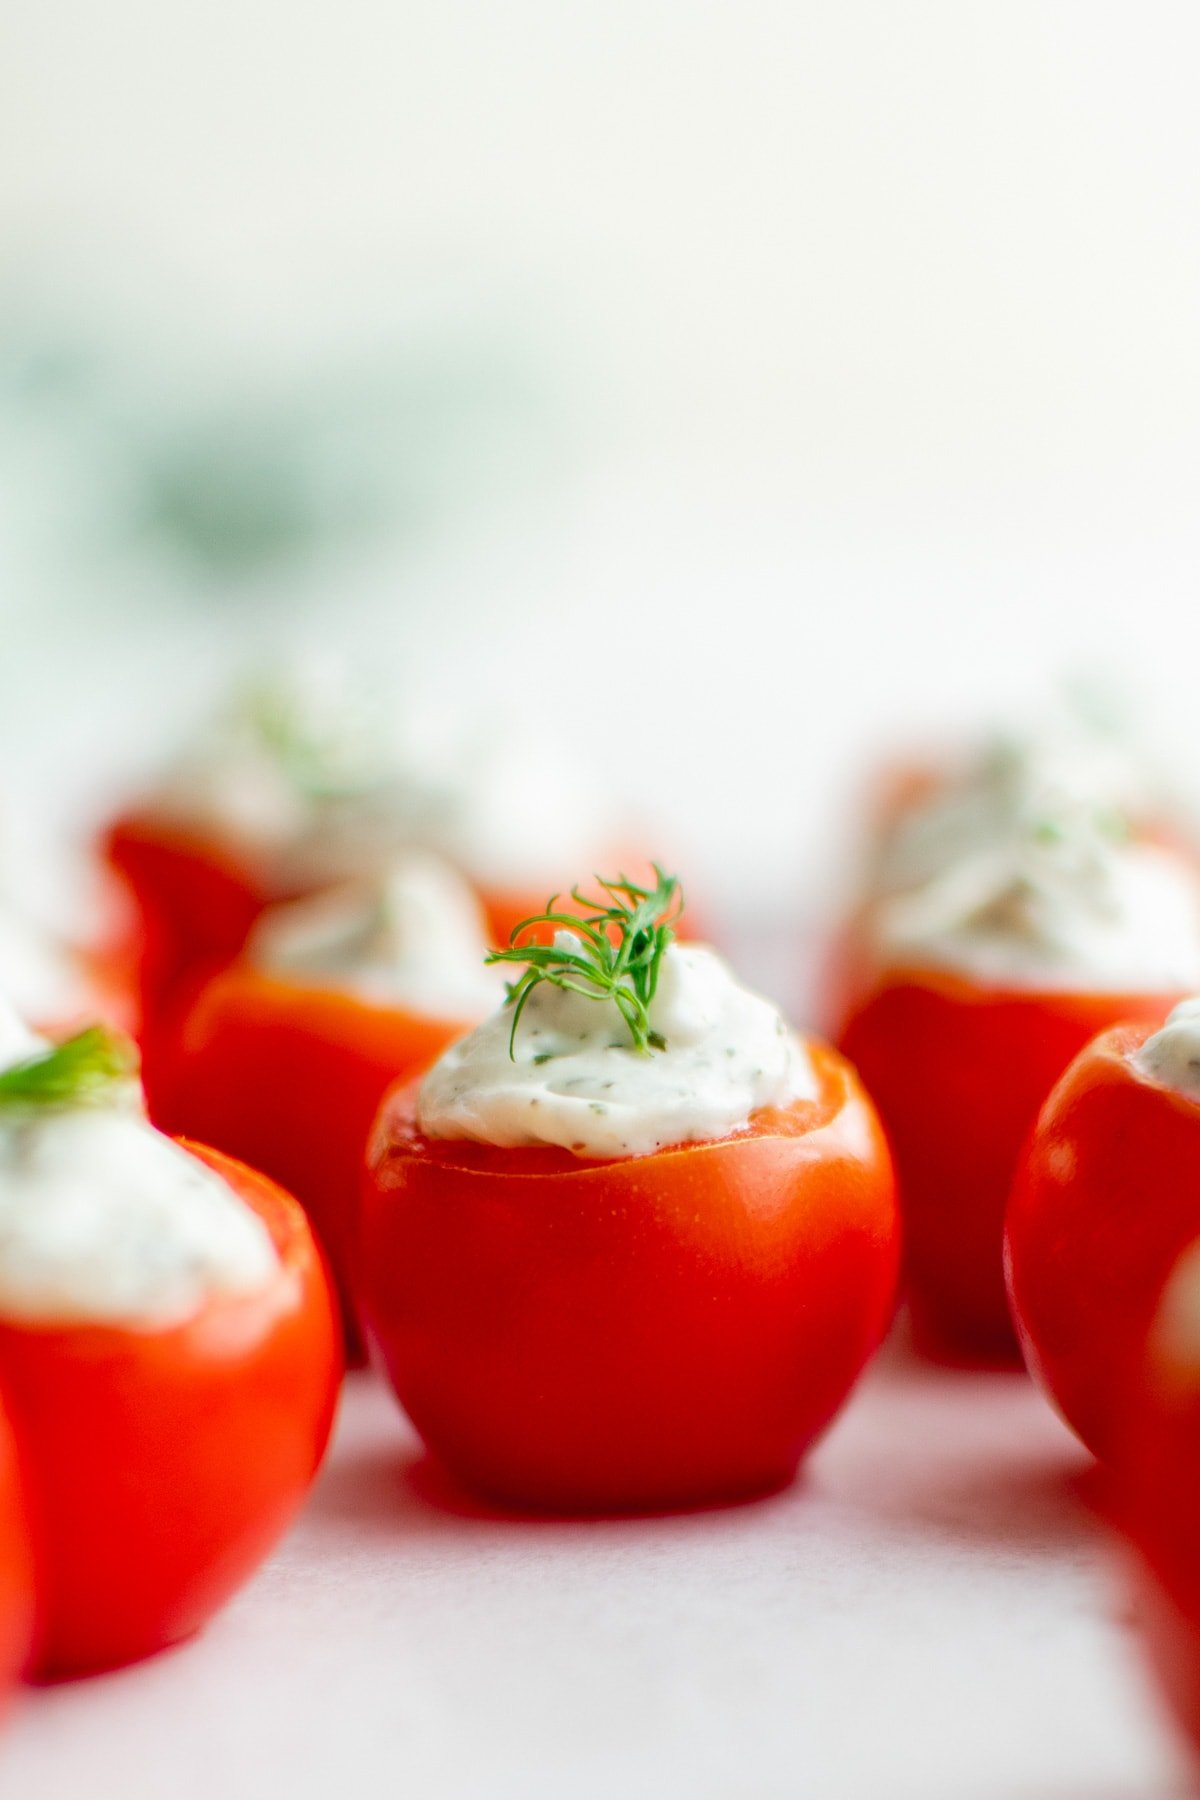 stuffed cherry tomatoes with dill on top